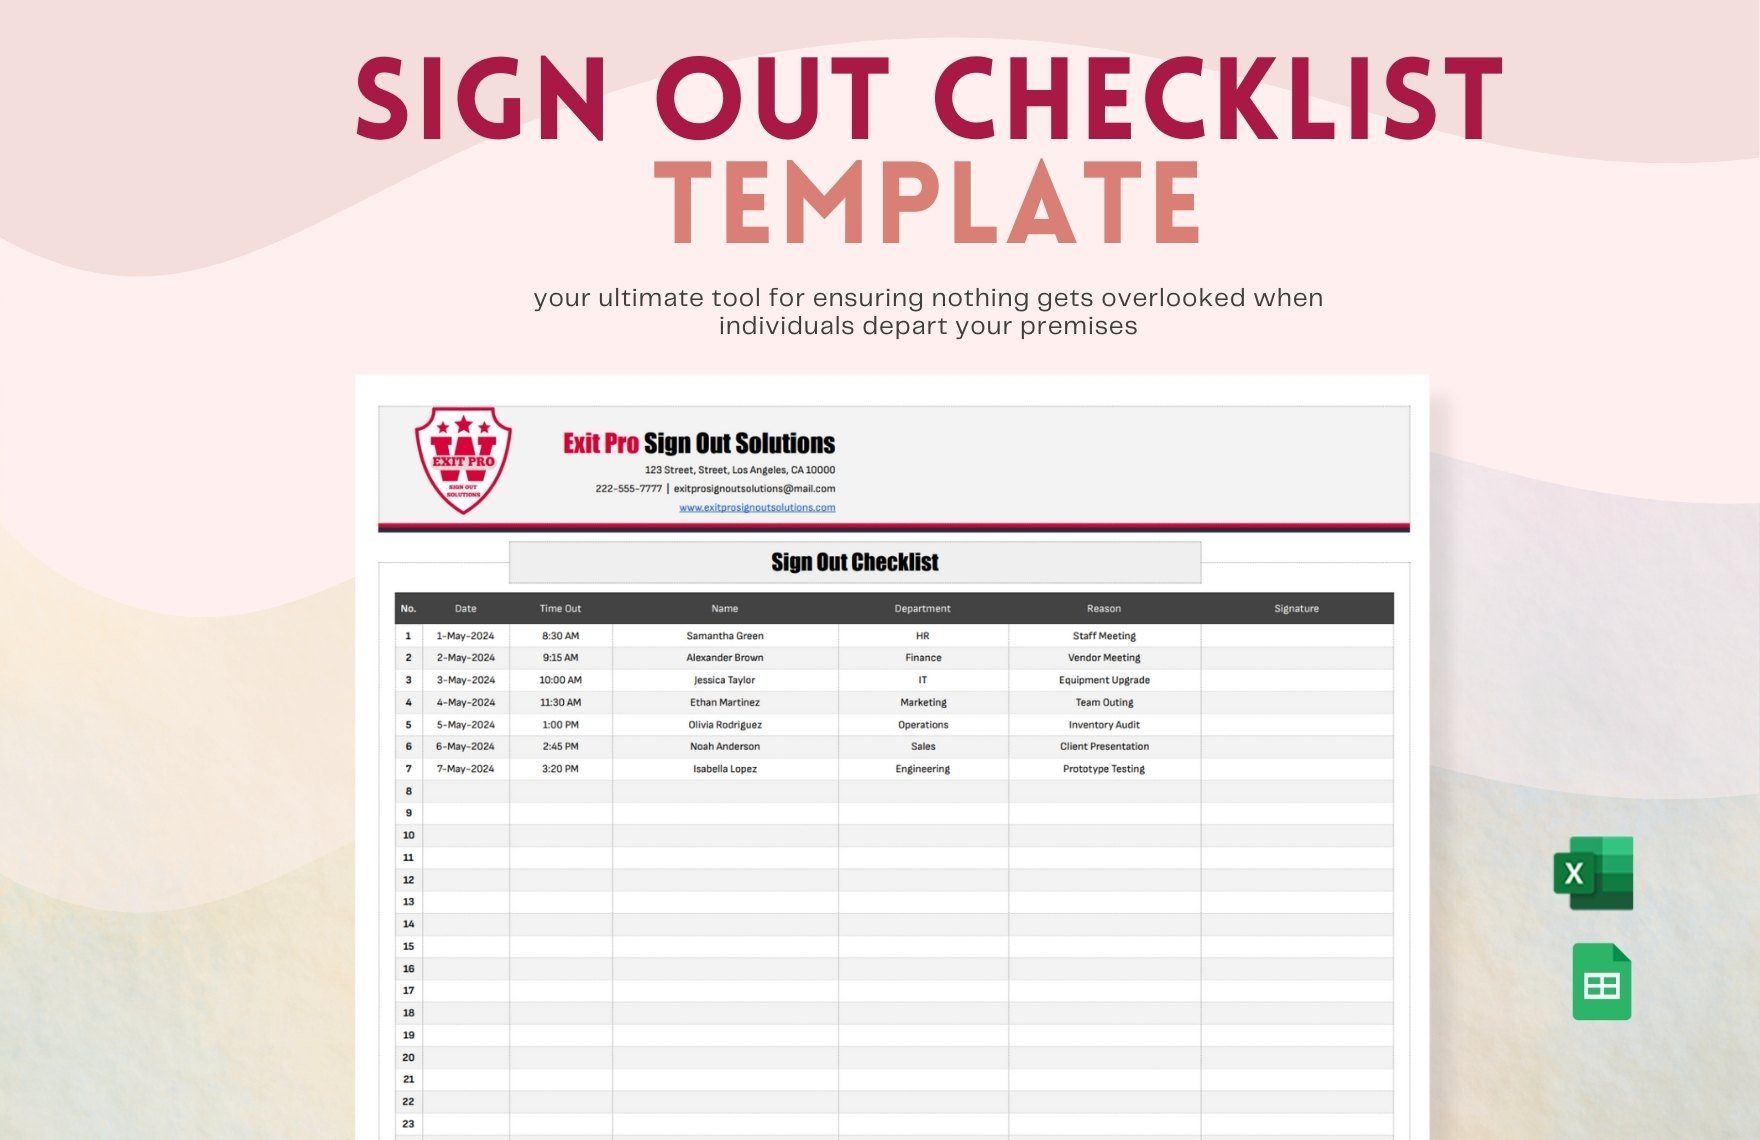 Sign Out Checklist Template